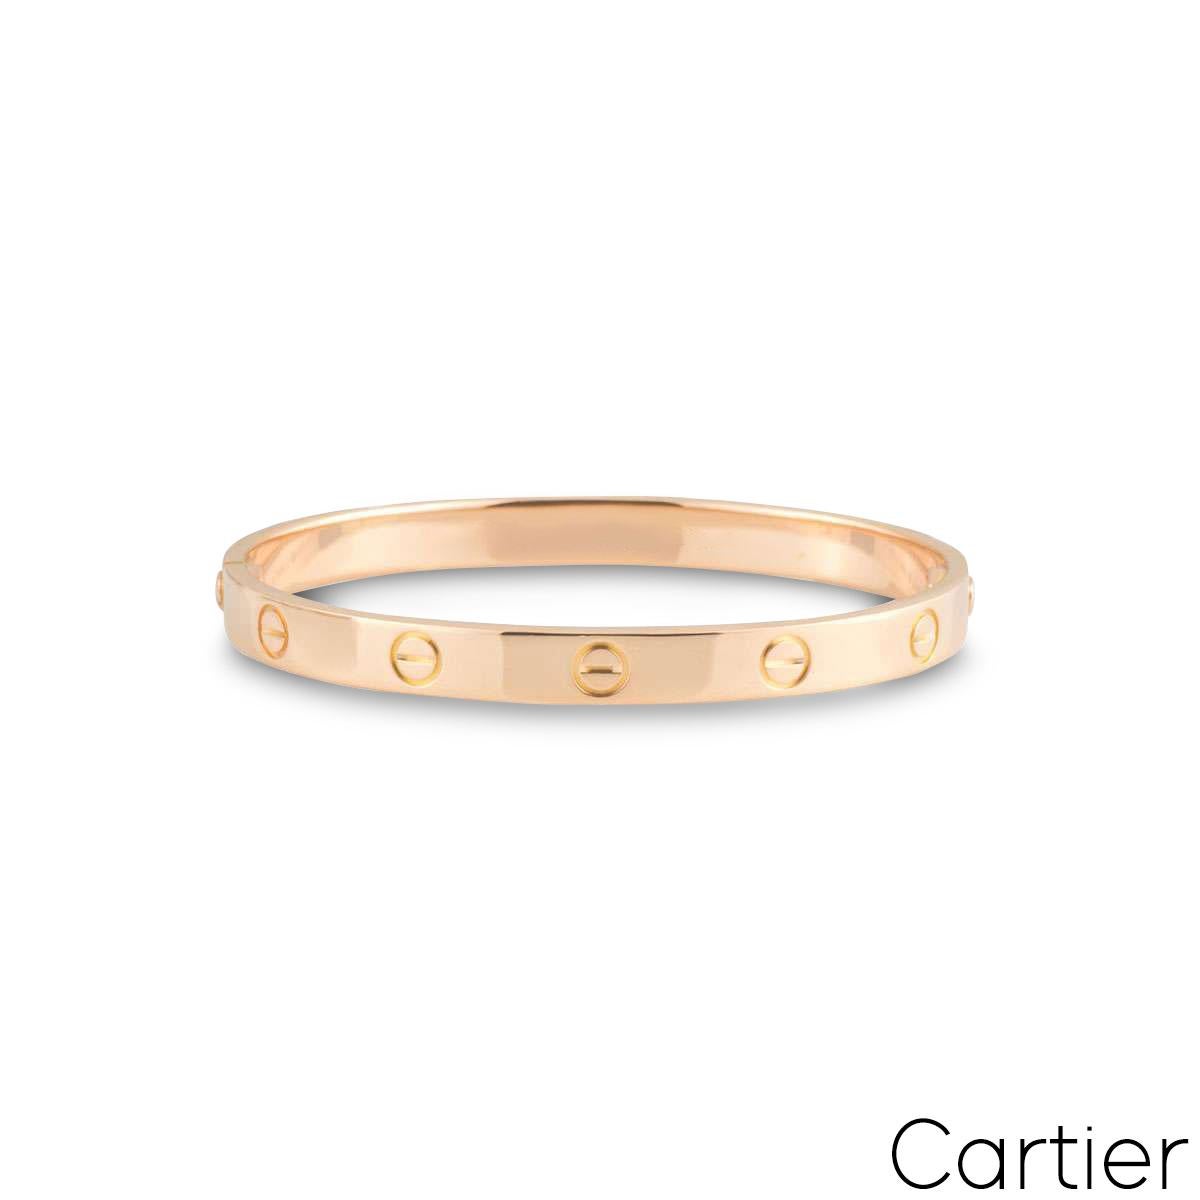 A signature 18k rose gold Cartier plain bracelet from the Love collection. The bracelet has the iconic screw motif displayed around the outer side of the bangle and has the new style screw fitting. The bracelet is a size 16 and has a gross weight of